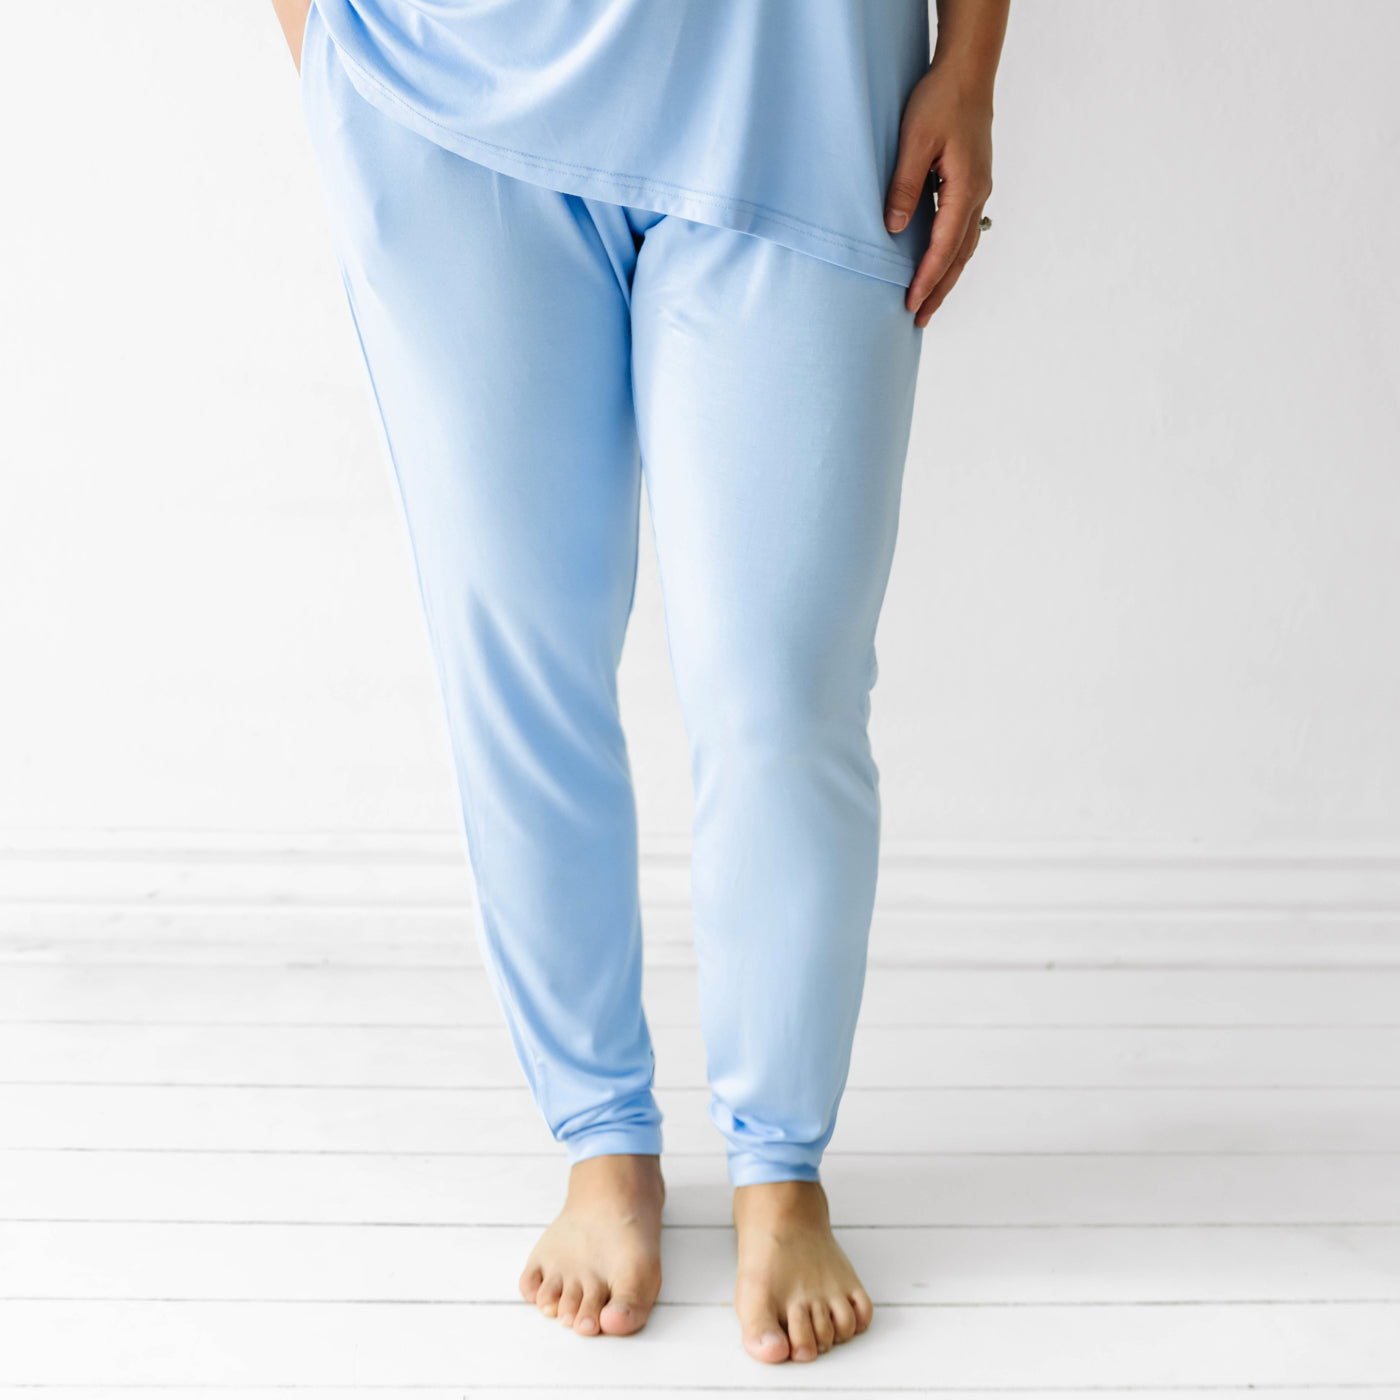 Stafford Knot Women's Pajama Pants (AOP) - The Stafford Knot